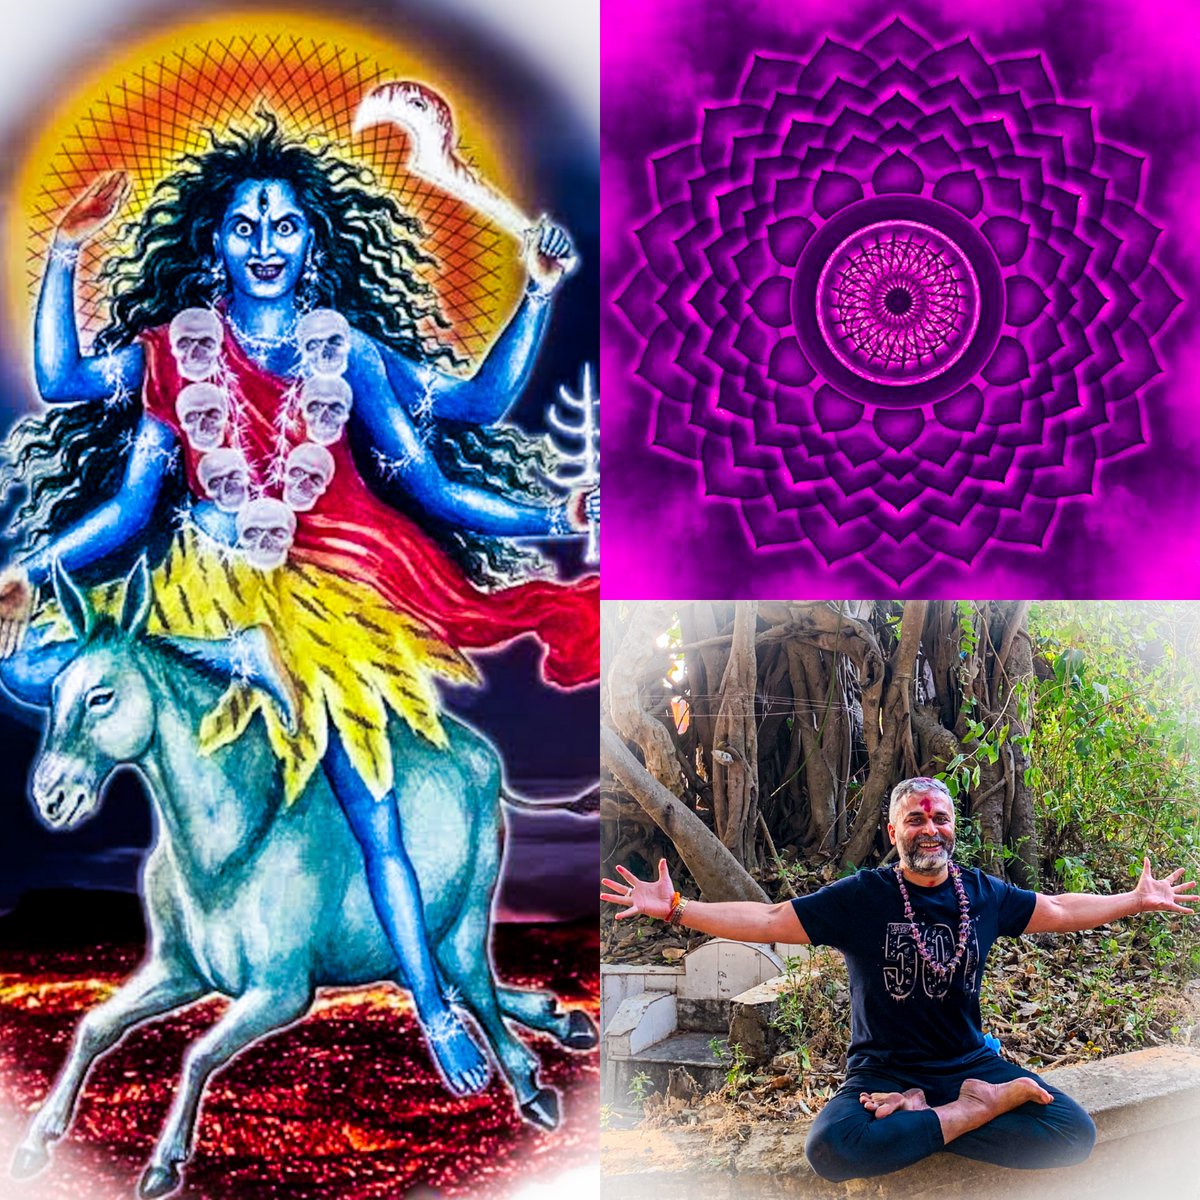 7th day of #Navratri — #Shakti is #Kalaratri ... After the upward journey of #Kundalini, coursing through the Sushumna channel and the 6 chakras along the way), today it is finally brought to the crown chakra, #Sahasrara ... read more - medium.com/yoga-beyond-as…